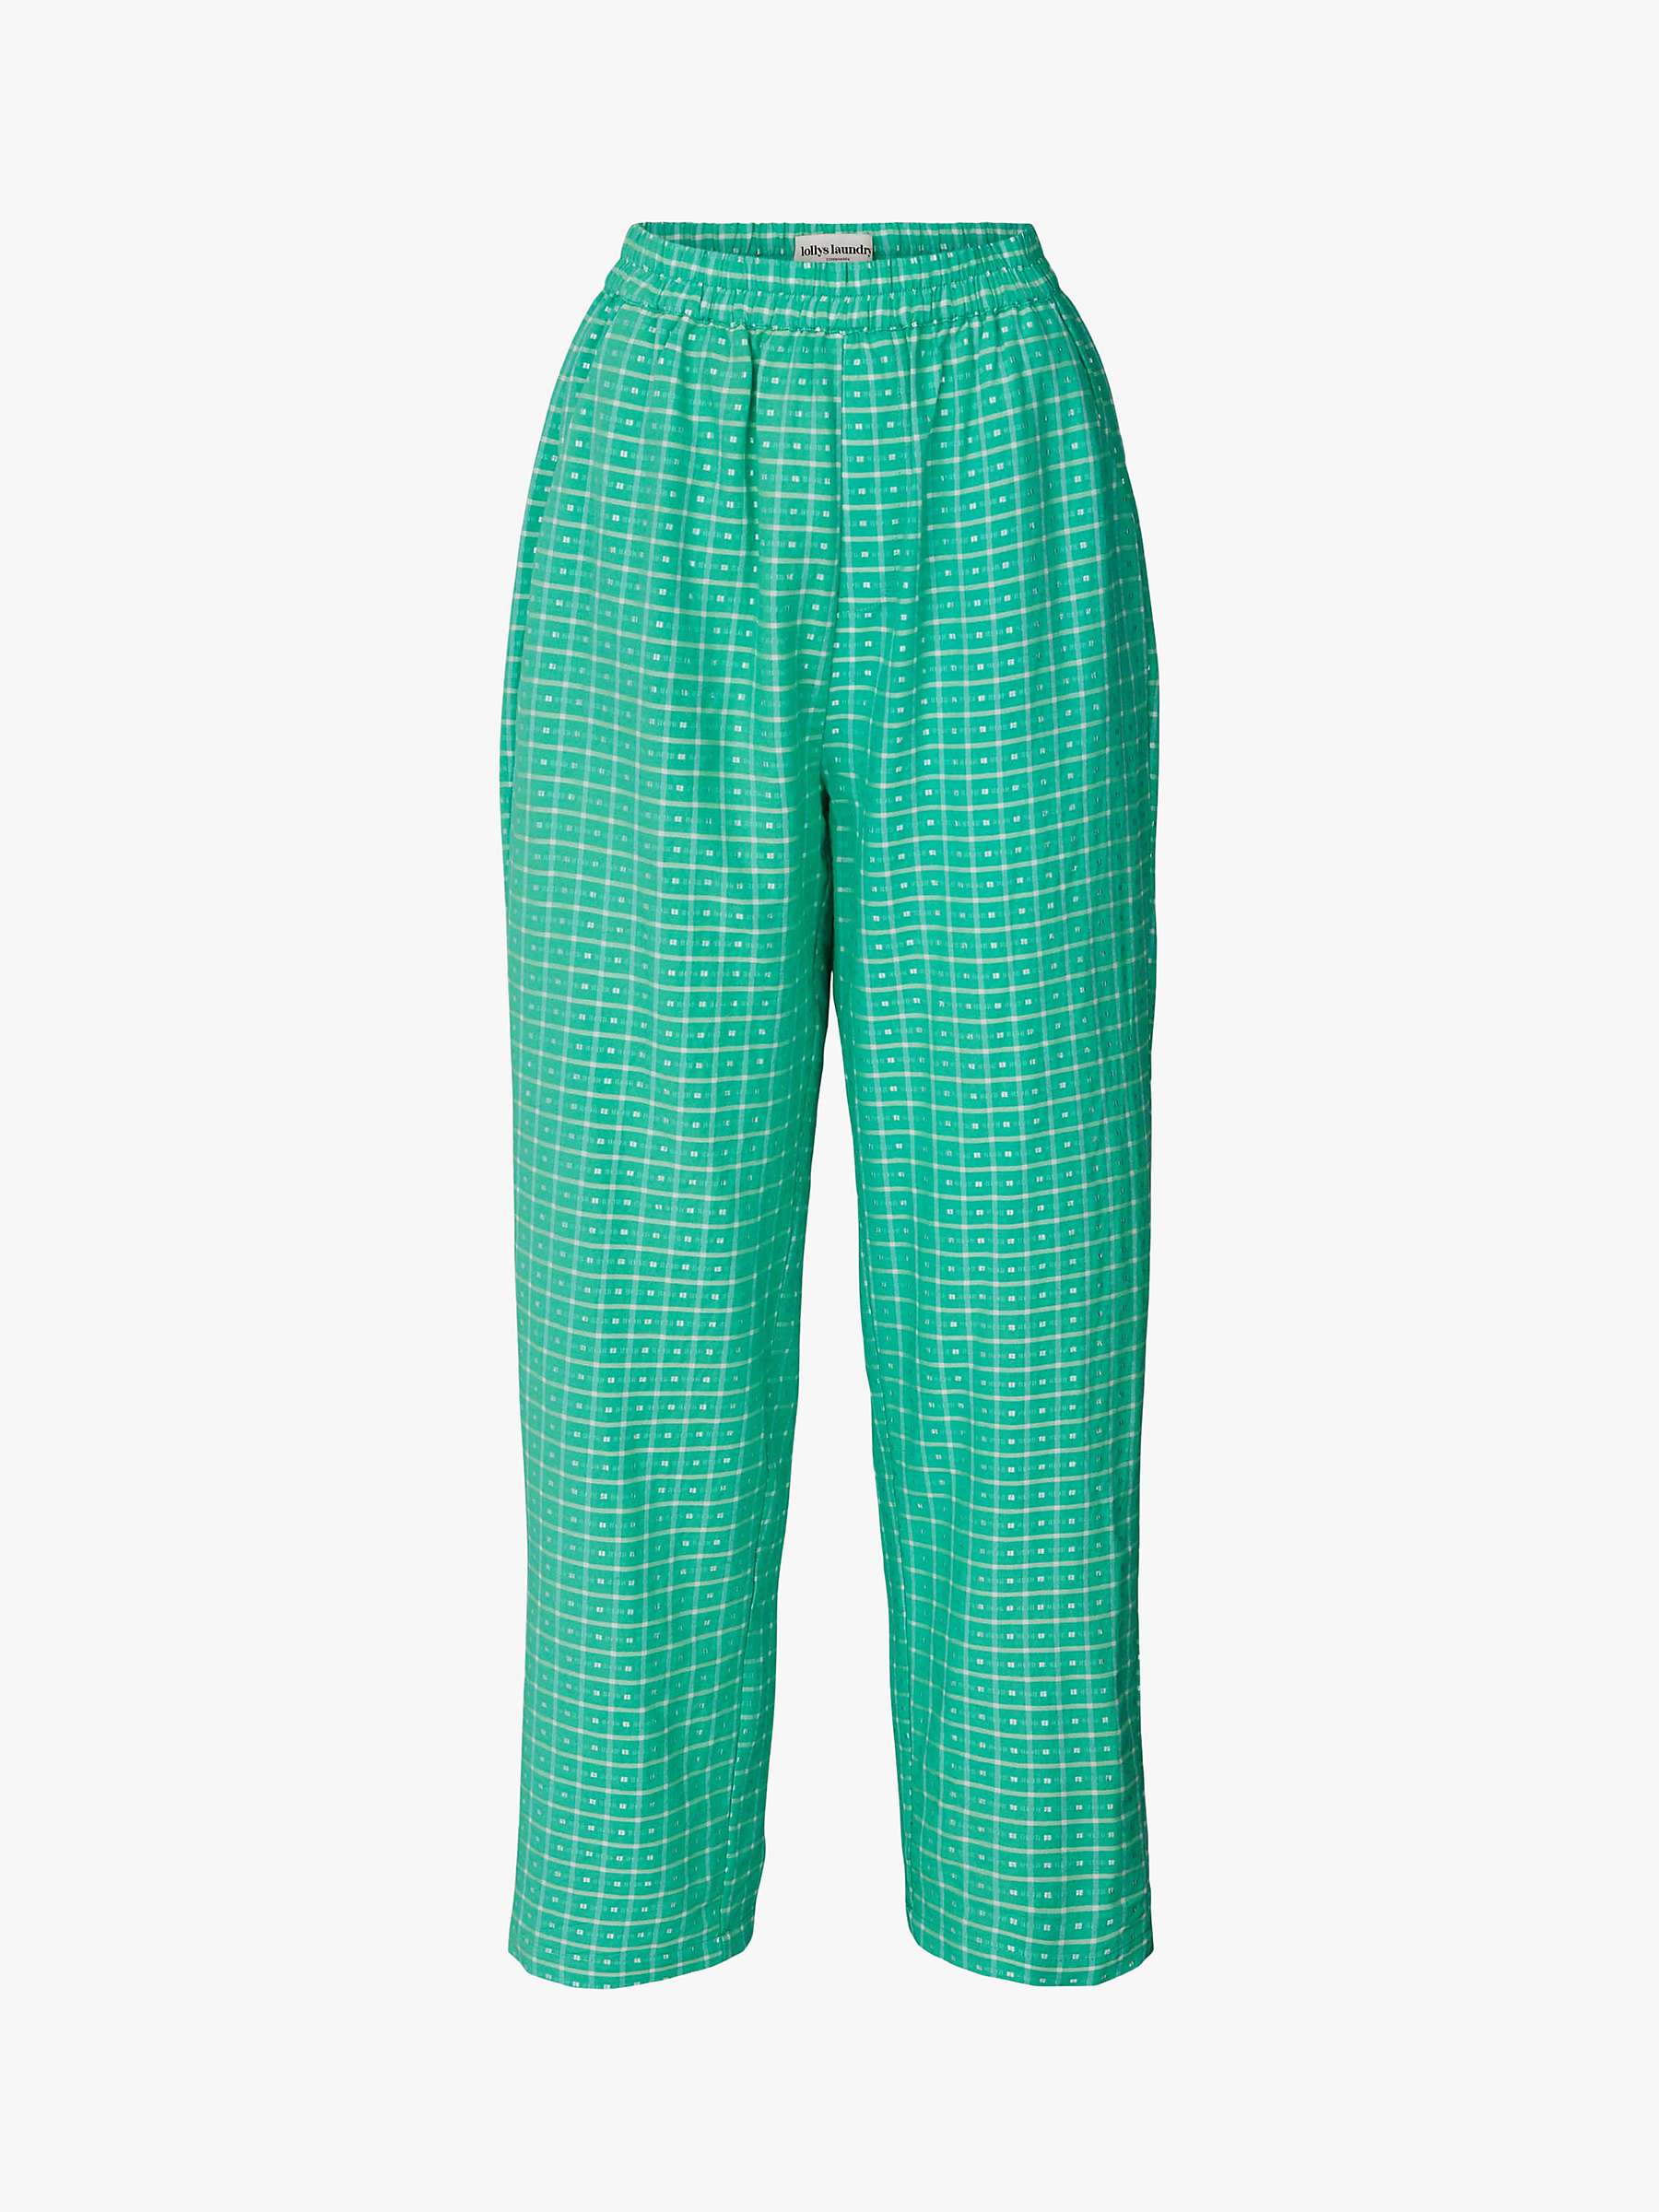 Buy Lollys Laundry Bill Check Print Trousers, Green Online at johnlewis.com